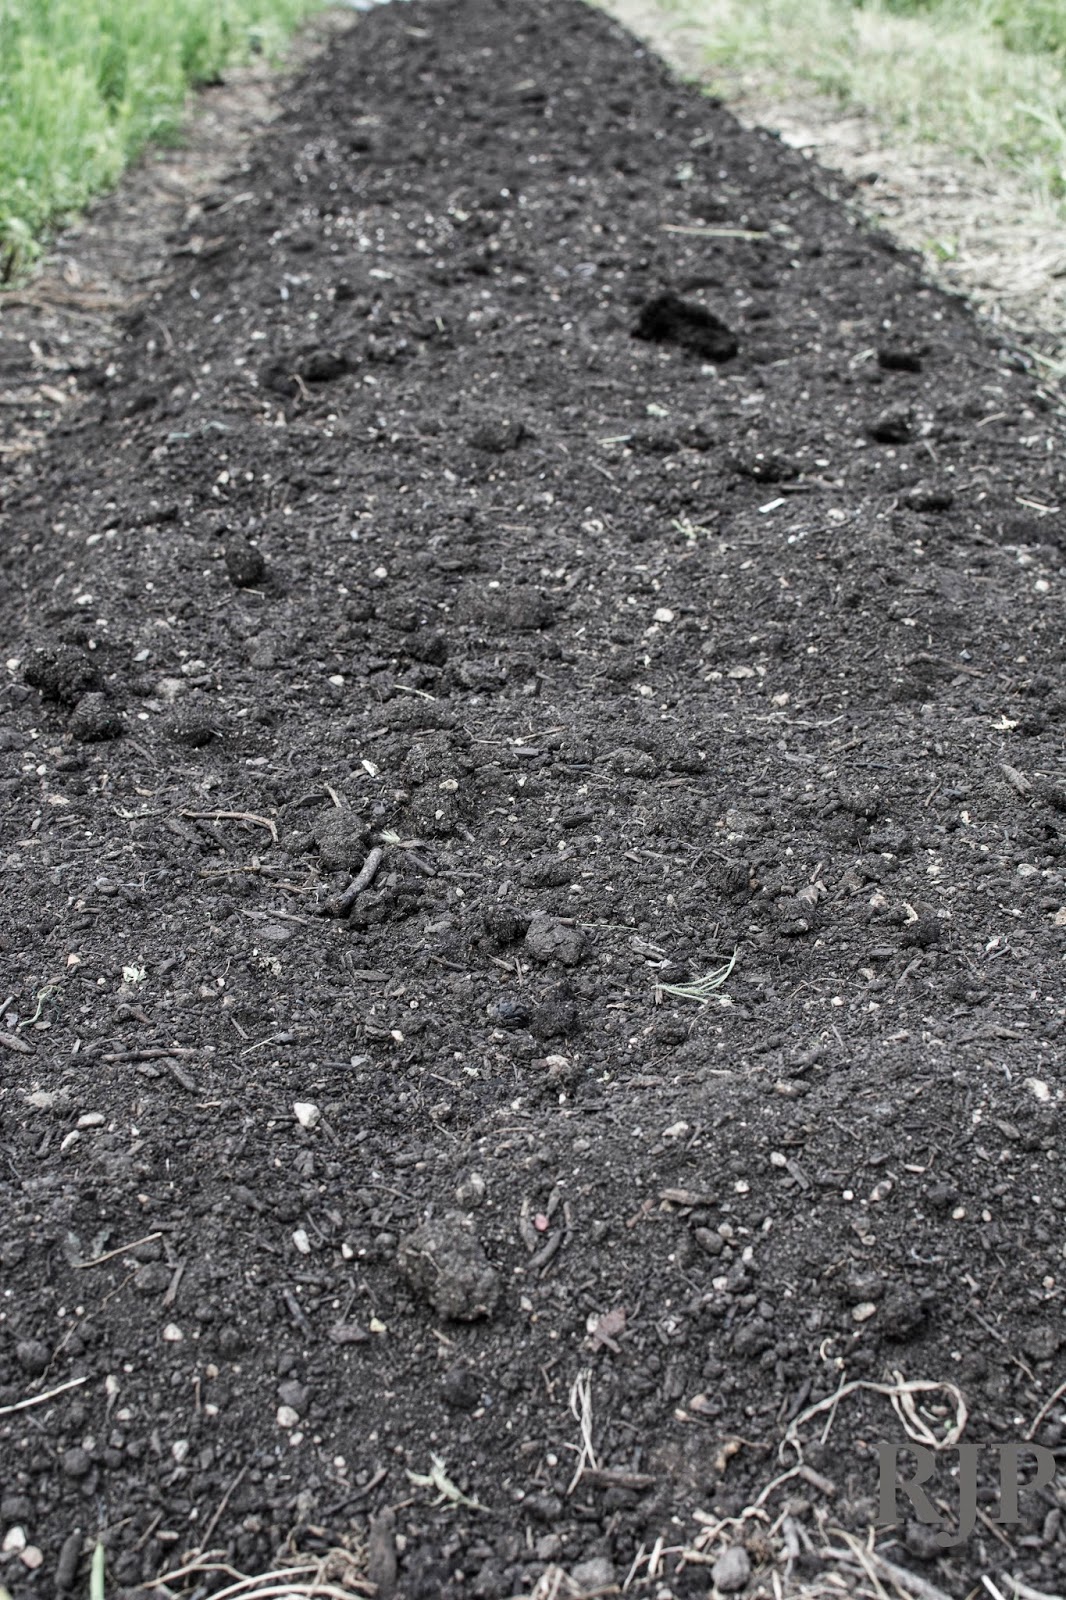 Compost Bed. Photo cred: Reed Petersen